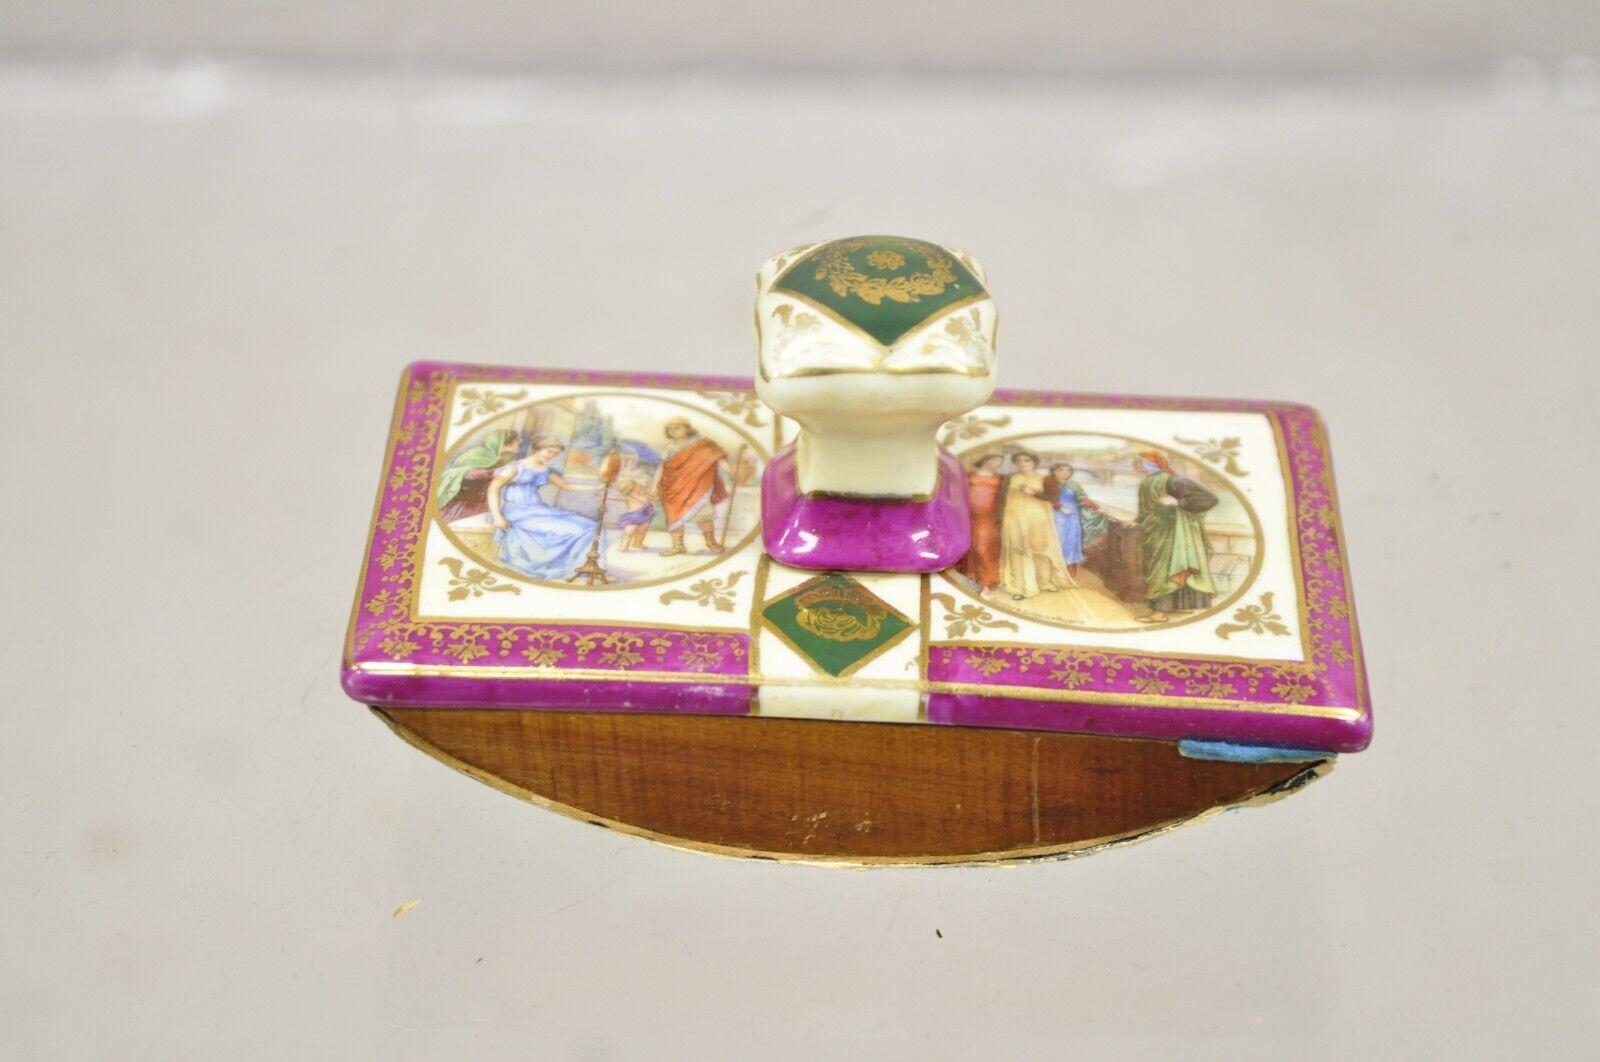 Antique Old Vienna Paris Porcelain Inkwell and Ink Blotter Desk Set - 2 Pc Set In Good Condition For Sale In Philadelphia, PA